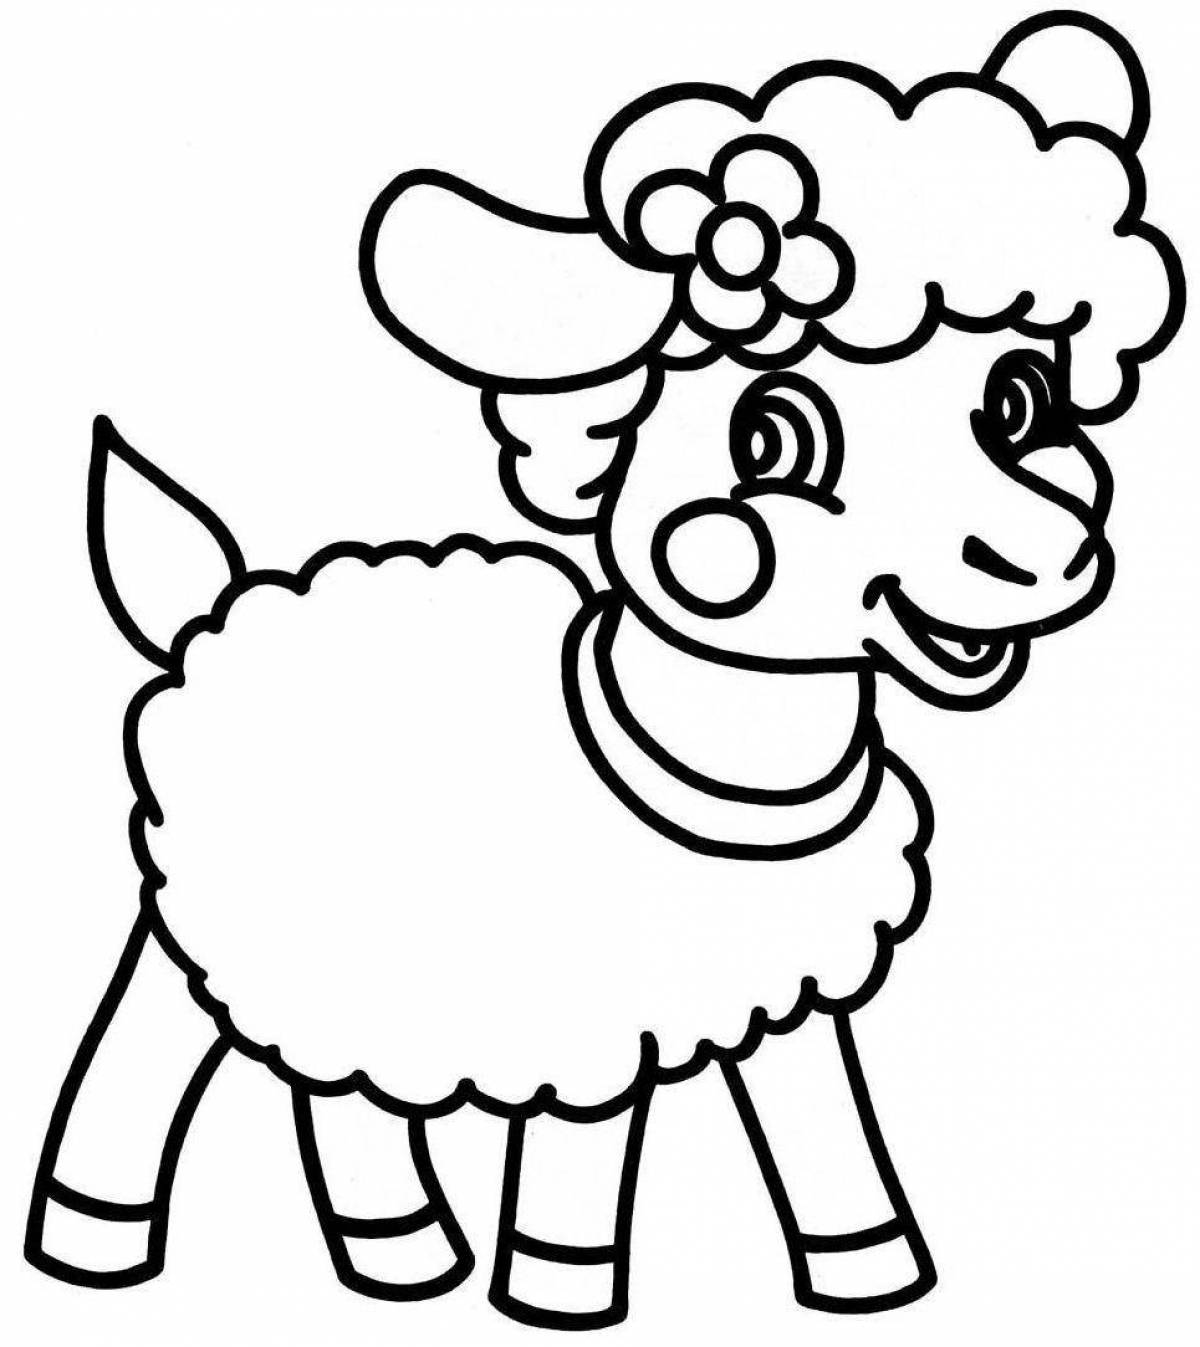 Dazzling lamb coloring book for kids